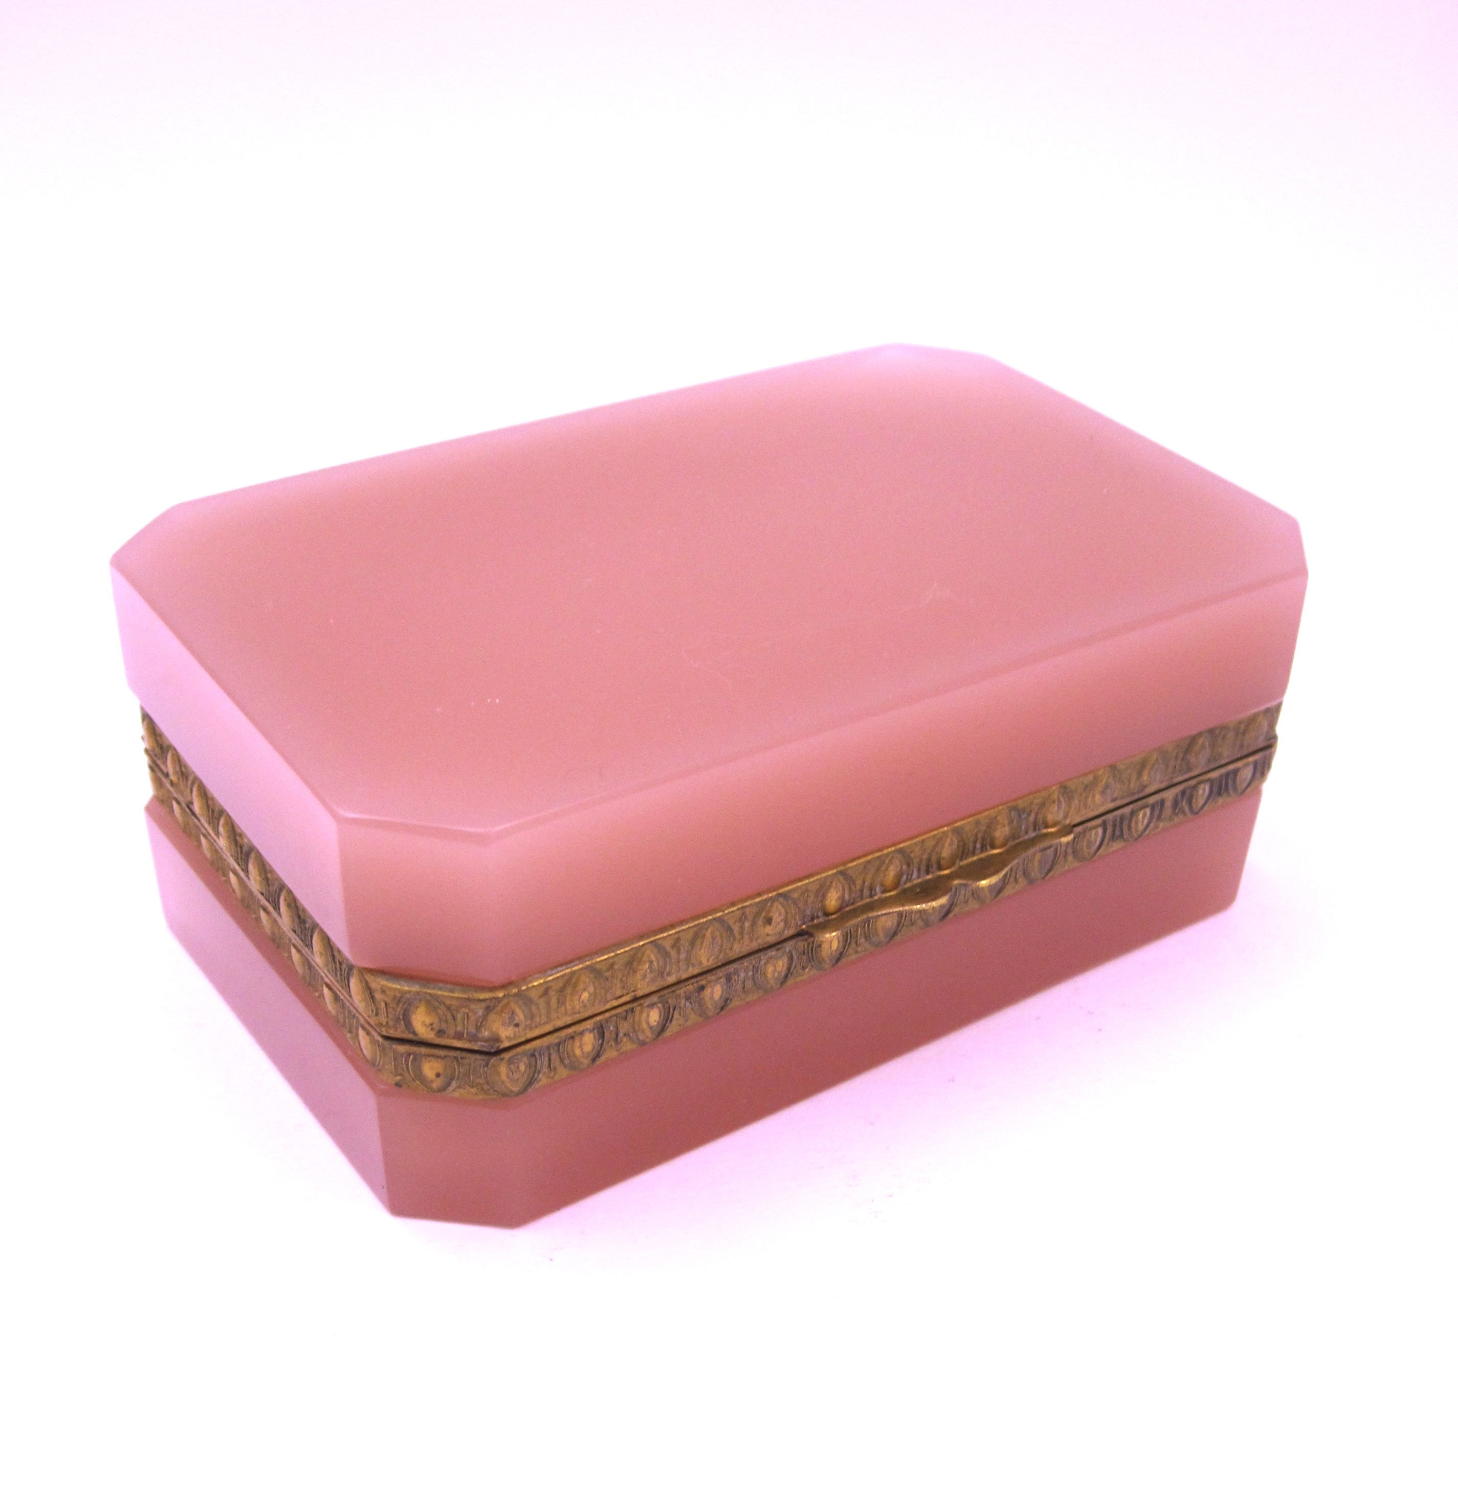 Antique French Pink Opaline Glass Casket Box with Fancy Mounts.